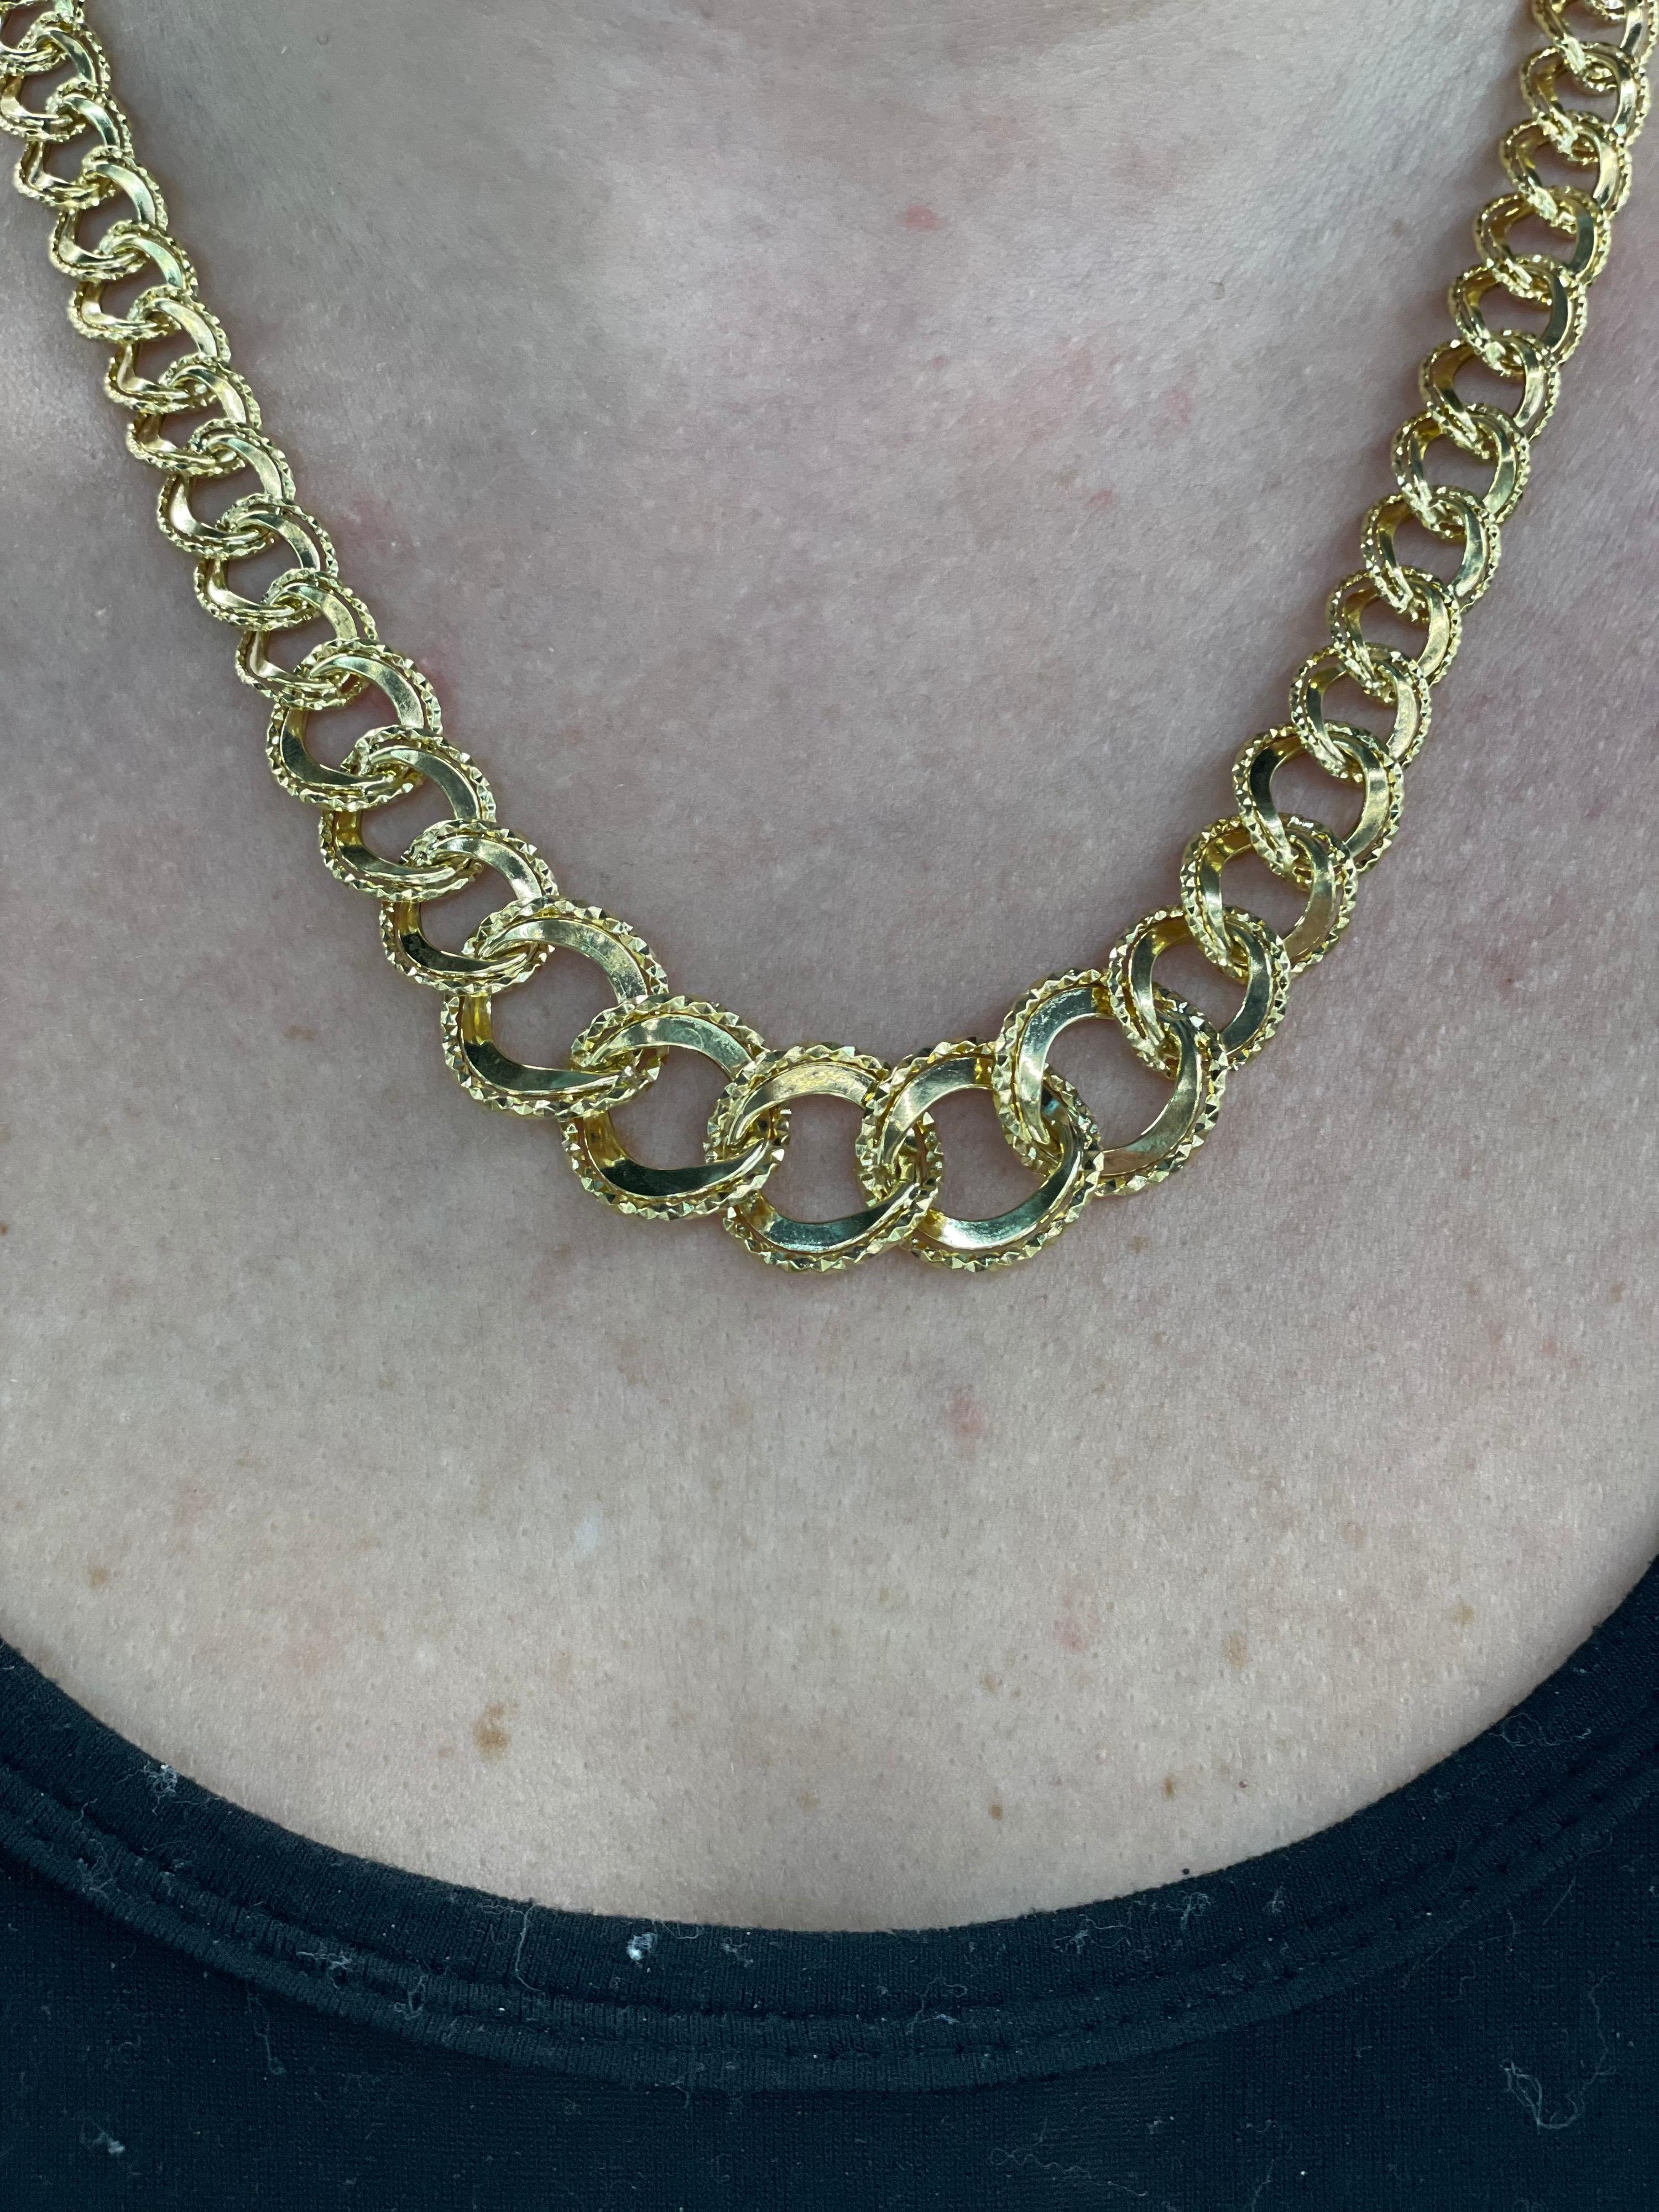 14 Karat Yellow Gold Graduated Link Necklace 13.6 Grams In Excellent Condition For Sale In New York, NY